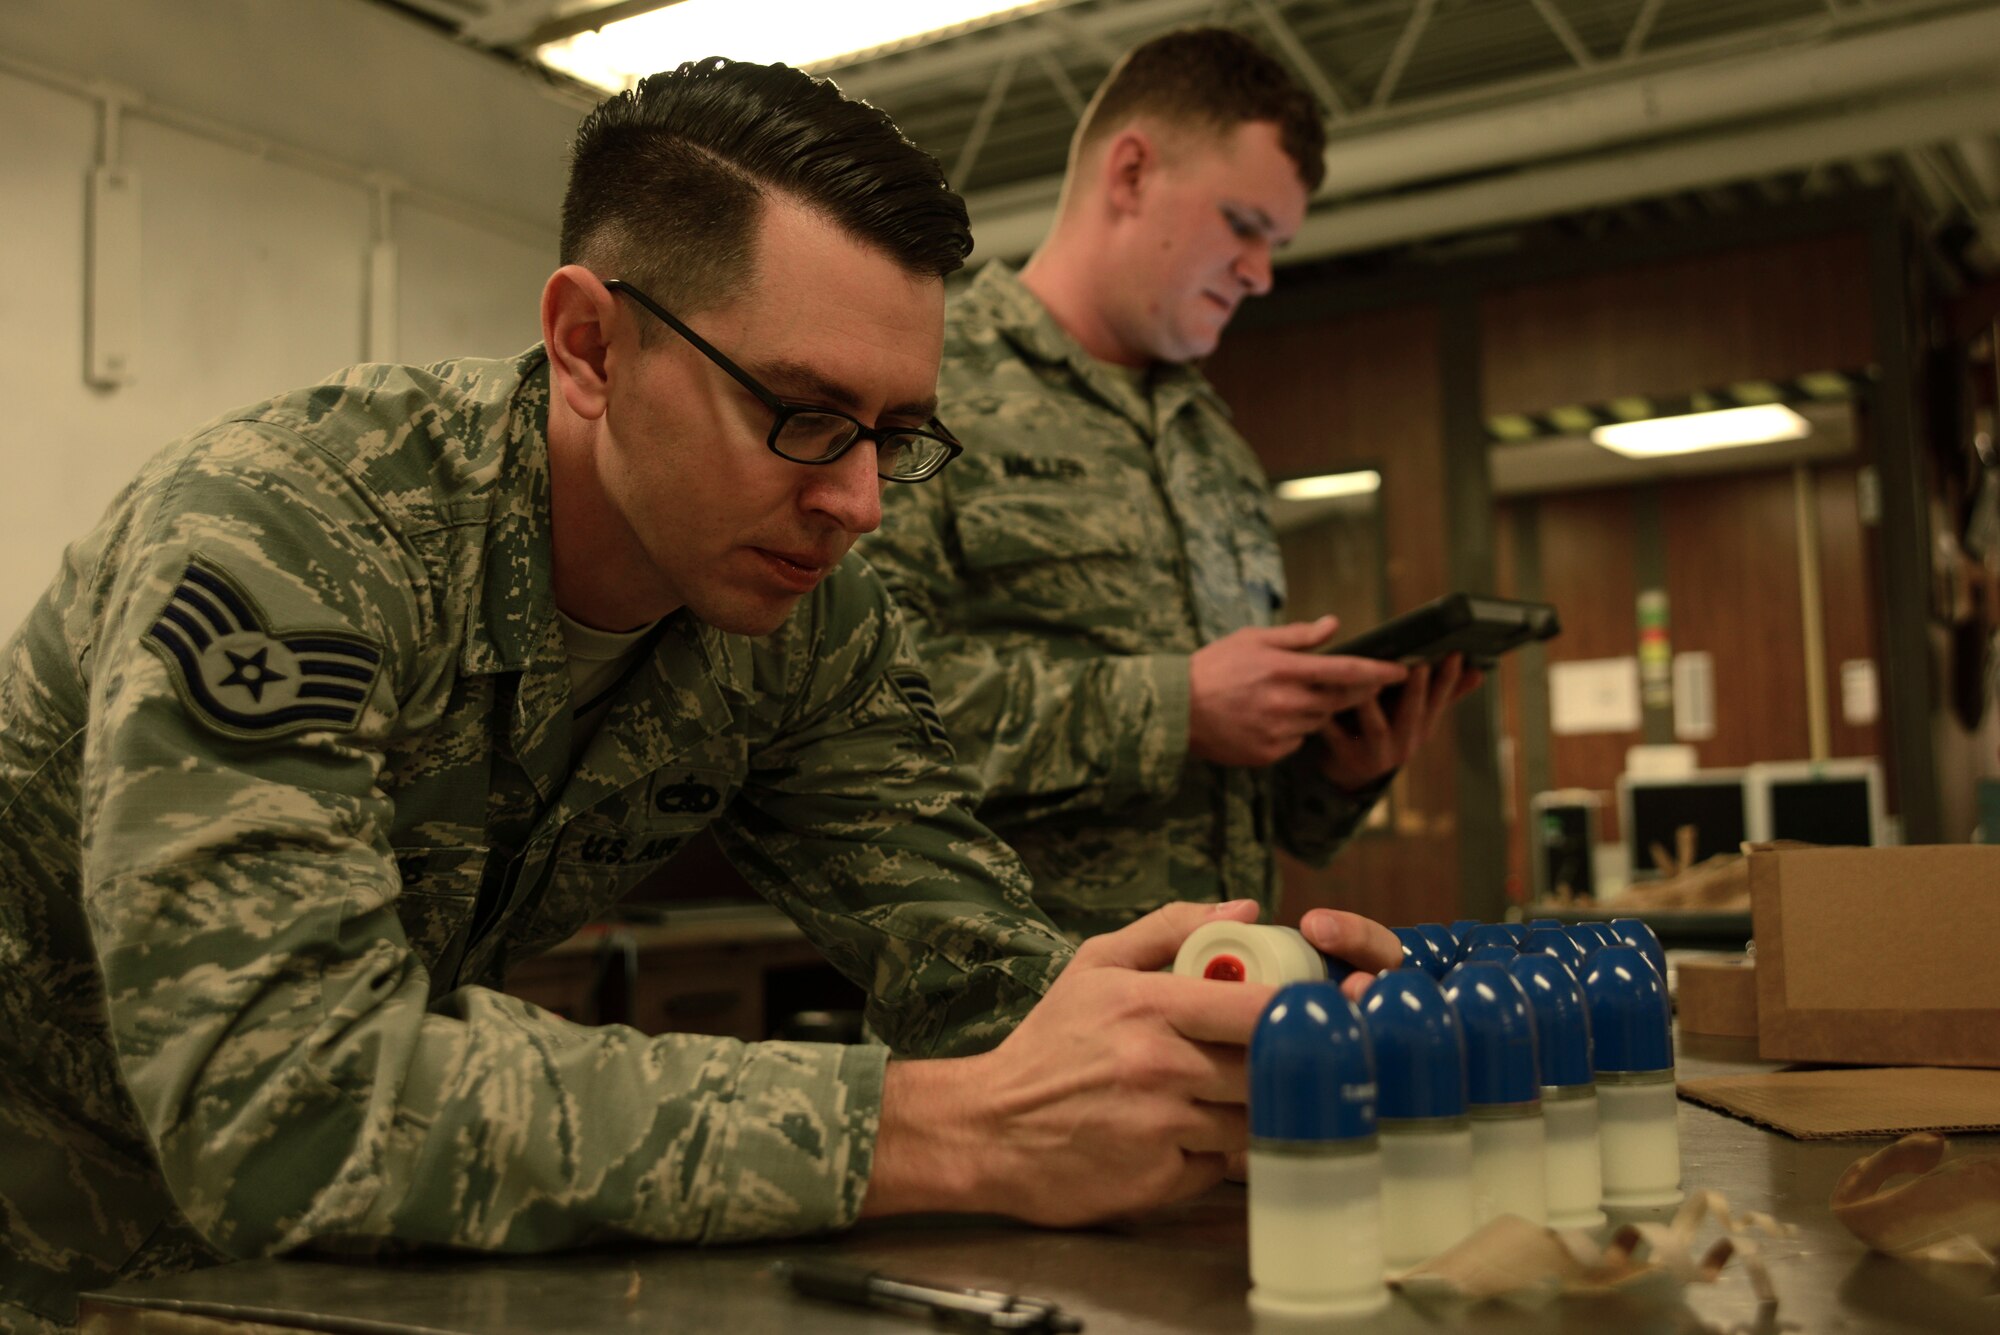 U.S. Air Force Staff Sgt. Ralph Simons, 20th Equipment Maintenance Squadron munitions inspector, left, visually inspects 40 mm grenades while Staff Sgt. Cameron Miller, right, 20th EMS munitions inspector, reads technical orders at Shaw Air Force Base, S.C., Feb. 6, 2017. Technical orders list detailed tasks that must be completed by munitions inspectors to ensure munitions will function properly. (U.S. Air Force photo by Airman 1st Class Kathryn R.C. Reaves)